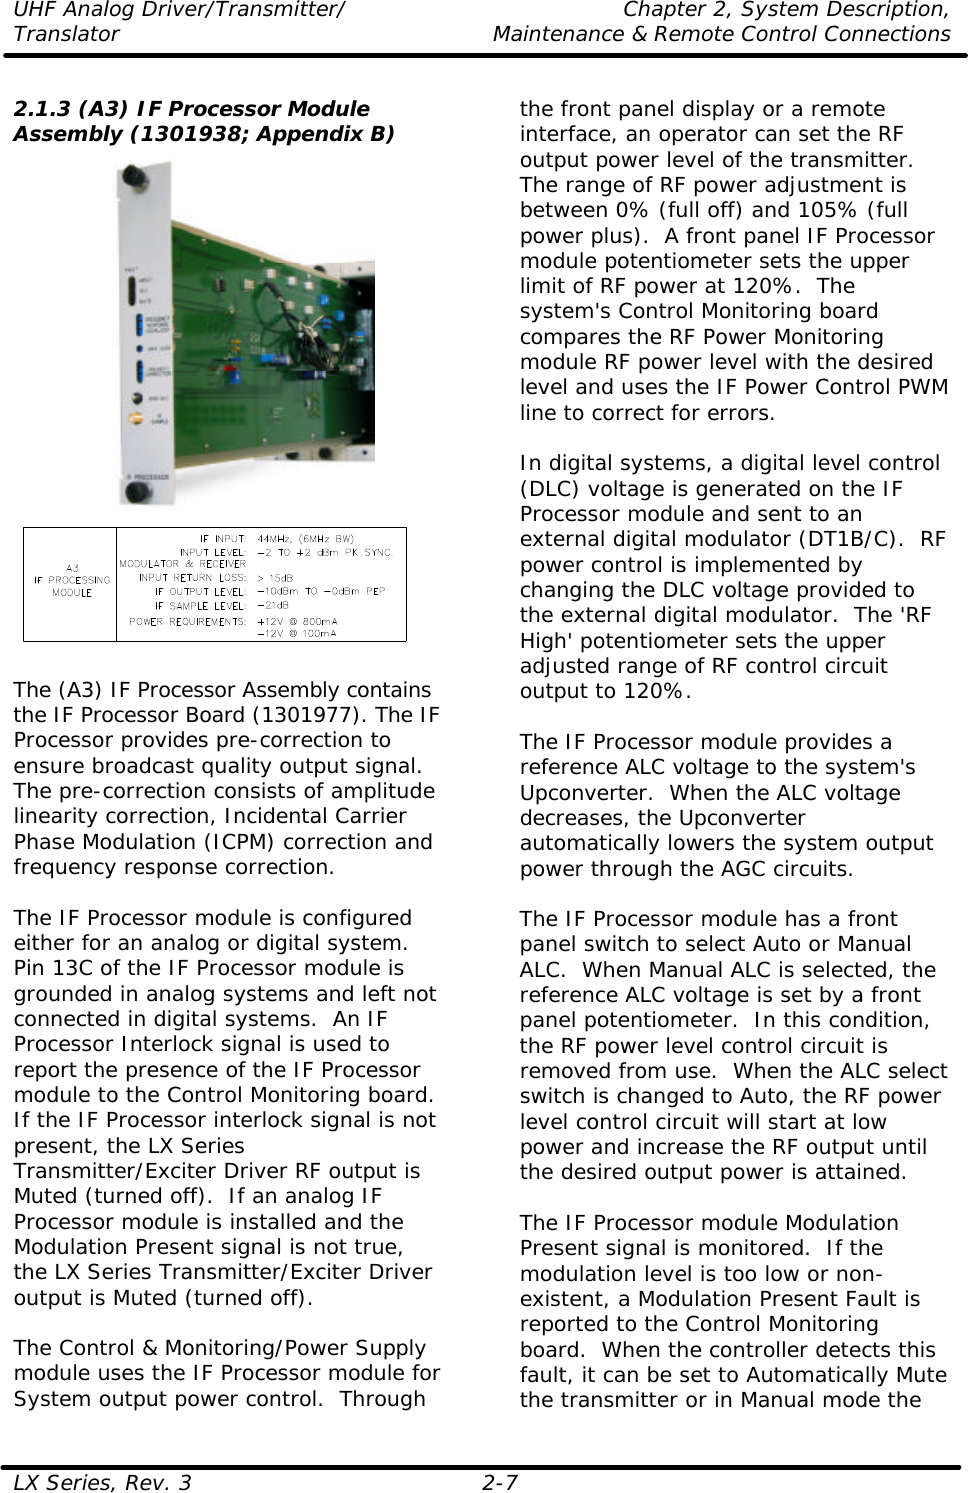 UHF Analog Driver/Transmitter/ Chapter 2, System Description, Translator Maintenance &amp; Remote Control Connections LX Series, Rev. 3 2-7  2.1.3 (A3) IF Processor Module Assembly (1301938; Appendix B)    The (A3) IF Processor Assembly contains the IF Processor Board (1301977). The IF Processor provides pre-correction to ensure broadcast quality output signal. The pre-correction consists of amplitude linearity correction, Incidental Carrier Phase Modulation (ICPM) correction and frequency response correction.  The IF Processor module is configured either for an analog or digital system.  Pin 13C of the IF Processor module is grounded in analog systems and left not connected in digital systems.  An IF Processor Interlock signal is used to report the presence of the IF Processor module to the Control Monitoring board.  If the IF Processor interlock signal is not present, the LX Series Transmitter/Exciter Driver RF output is Muted (turned off).  If an analog IF Processor module is installed and the Modulation Present signal is not true, the LX Series Transmitter/Exciter Driver output is Muted (turned off).  The Control &amp; Monitoring/Power Supply module uses the IF Processor module for System output power control.  Through the front panel display or a remote interface, an operator can set the RF output power level of the transmitter.  The range of RF power adjustment is between 0% (full off) and 105% (full power plus).  A front panel IF Processor module potentiometer sets the upper limit of RF power at 120%.  The system&apos;s Control Monitoring board compares the RF Power Monitoring module RF power level with the desired level and uses the IF Power Control PWM line to correct for errors.   In digital systems, a digital level control (DLC) voltage is generated on the IF Processor module and sent to an external digital modulator (DT1B/C).  RF power control is implemented by changing the DLC voltage provided to the external digital modulator.  The &apos;RF High&apos; potentiometer sets the upper adjusted range of RF control circuit output to 120%.   The IF Processor module provides a reference ALC voltage to the system&apos;s Upconverter.  When the ALC voltage decreases, the Upconverter automatically lowers the system output power through the AGC circuits.  The IF Processor module has a front panel switch to select Auto or Manual ALC.  When Manual ALC is selected, the reference ALC voltage is set by a front panel potentiometer.  In this condition, the RF power level control circuit is removed from use.  When the ALC select switch is changed to Auto, the RF power level control circuit will start at low power and increase the RF output until the desired output power is attained.  The IF Processor module Modulation Present signal is monitored.  If the modulation level is too low or non-existent, a Modulation Present Fault is reported to the Control Monitoring board.  When the controller detects this fault, it can be set to Automatically Mute the transmitter or in Manual mode the 